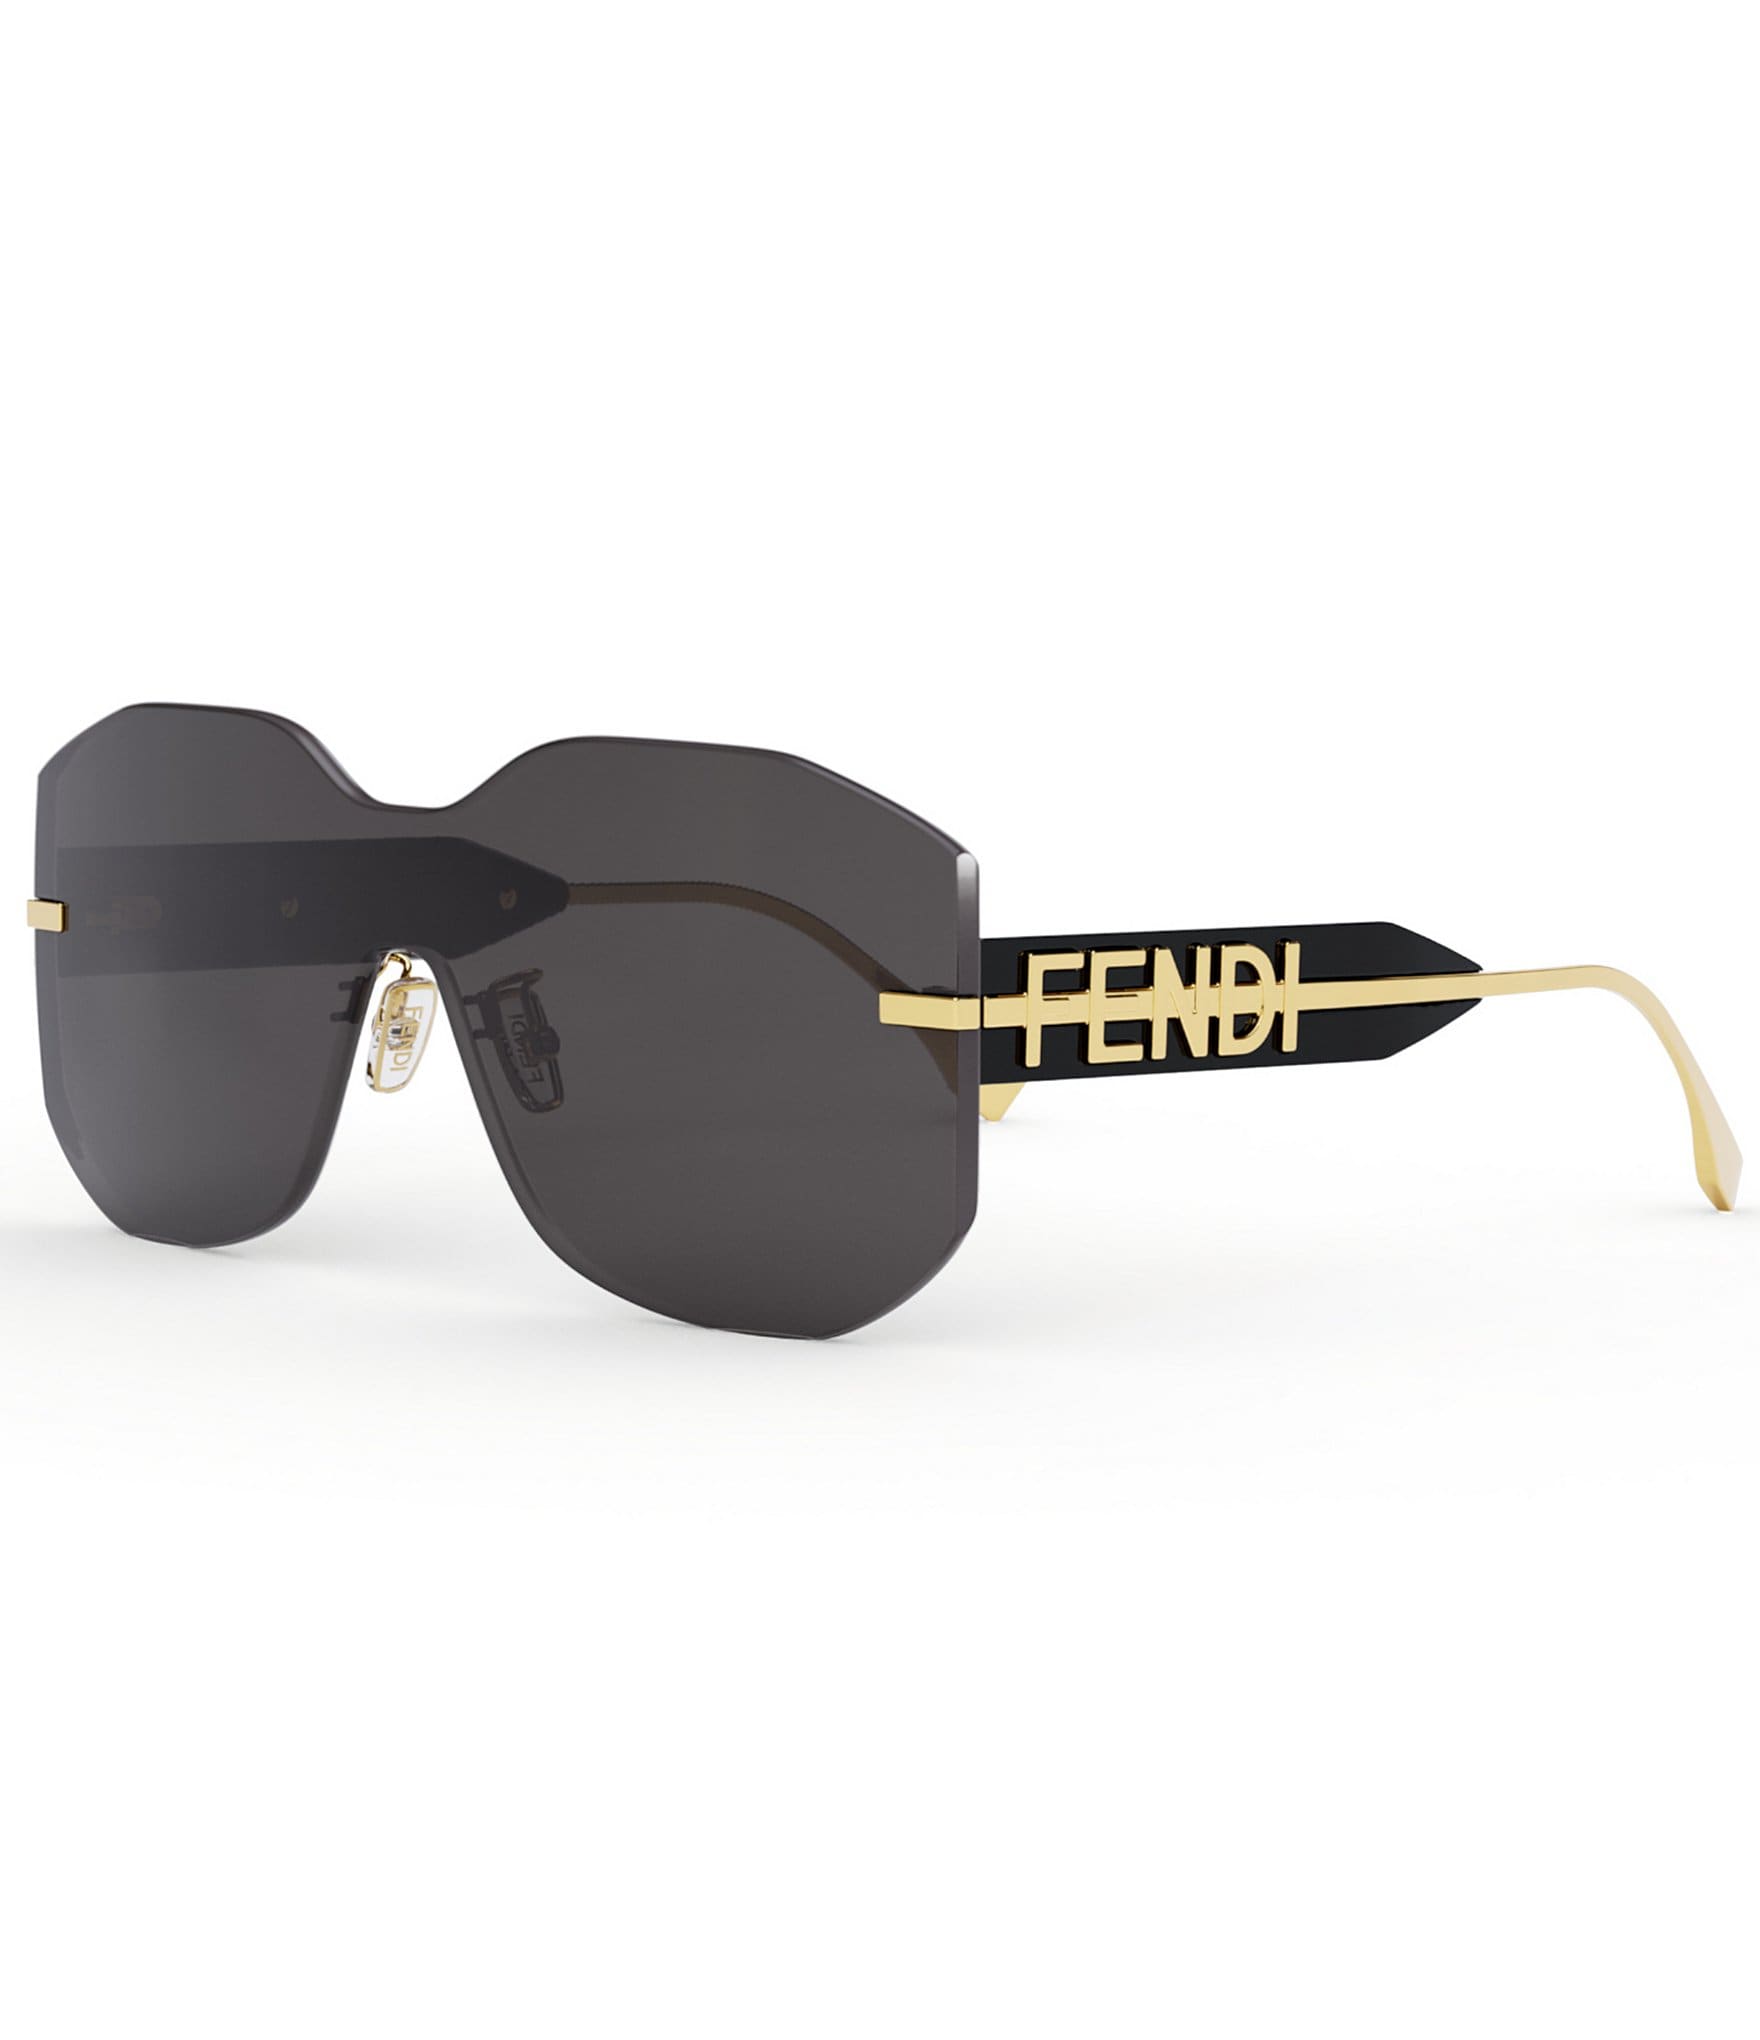 Fendi sunglasses - clothing & accessories - by owner - apparel